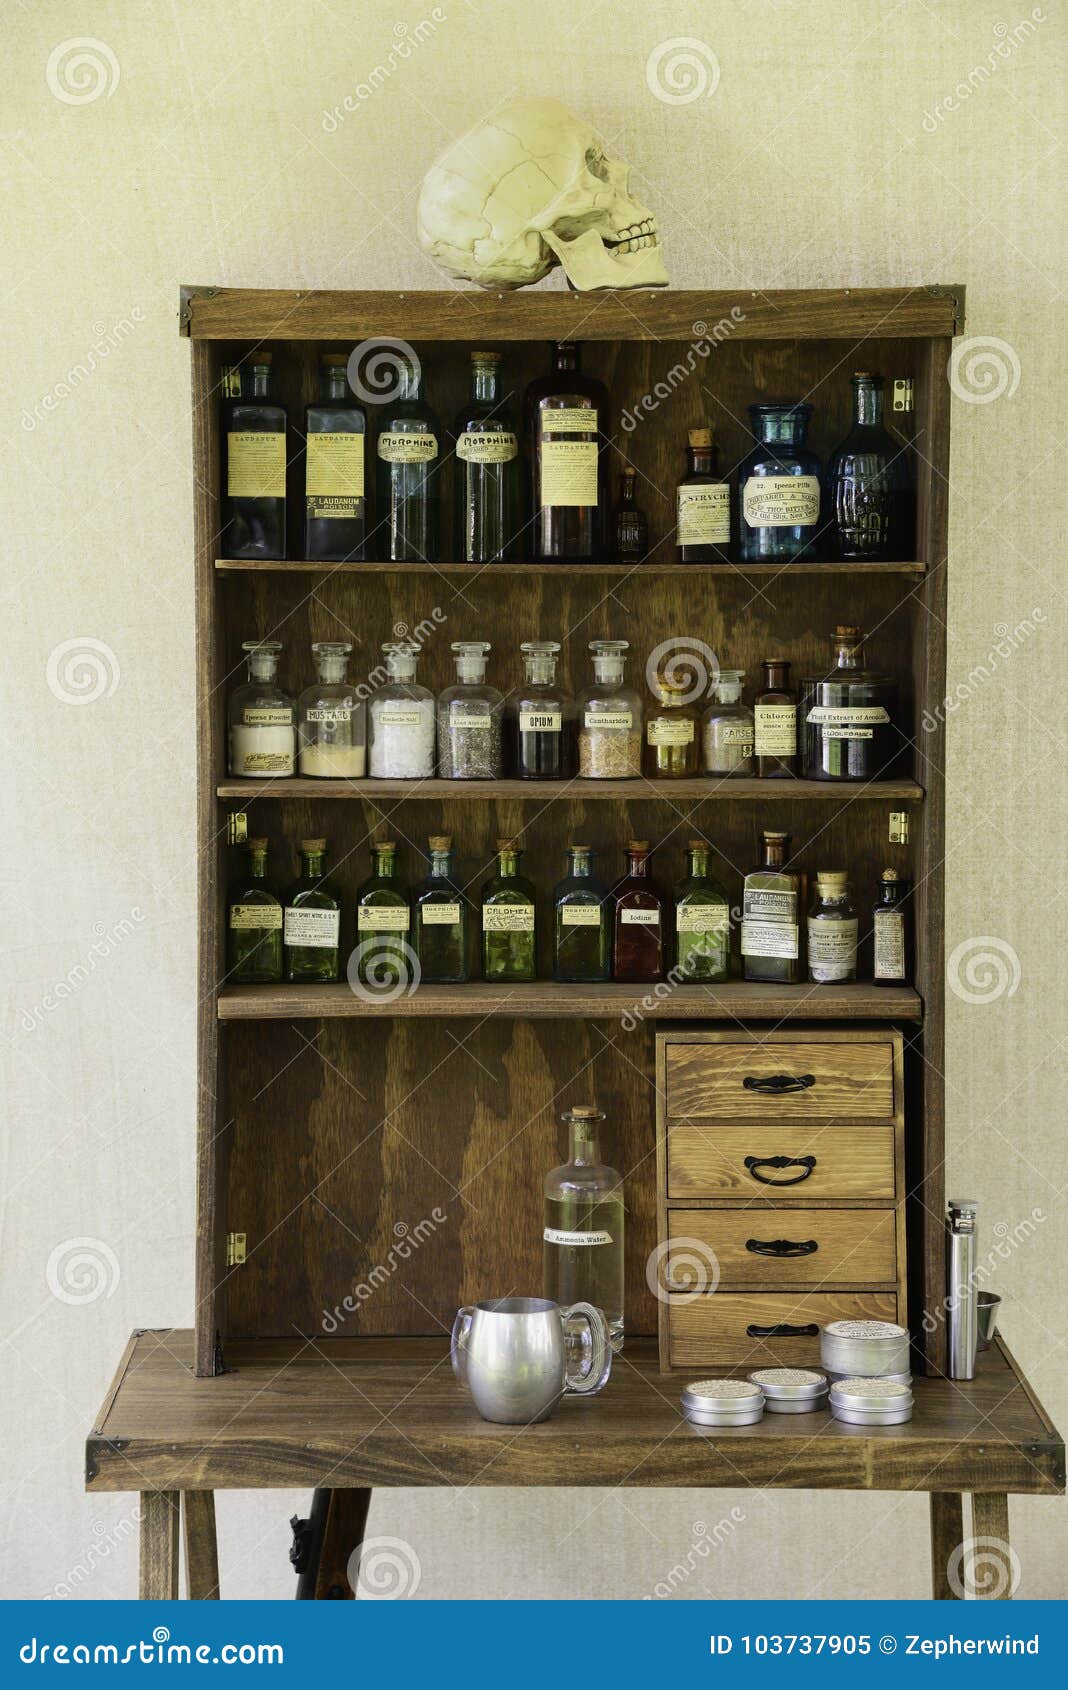 Old style medicine cabinet stock image. Image of cabinet - 103737905